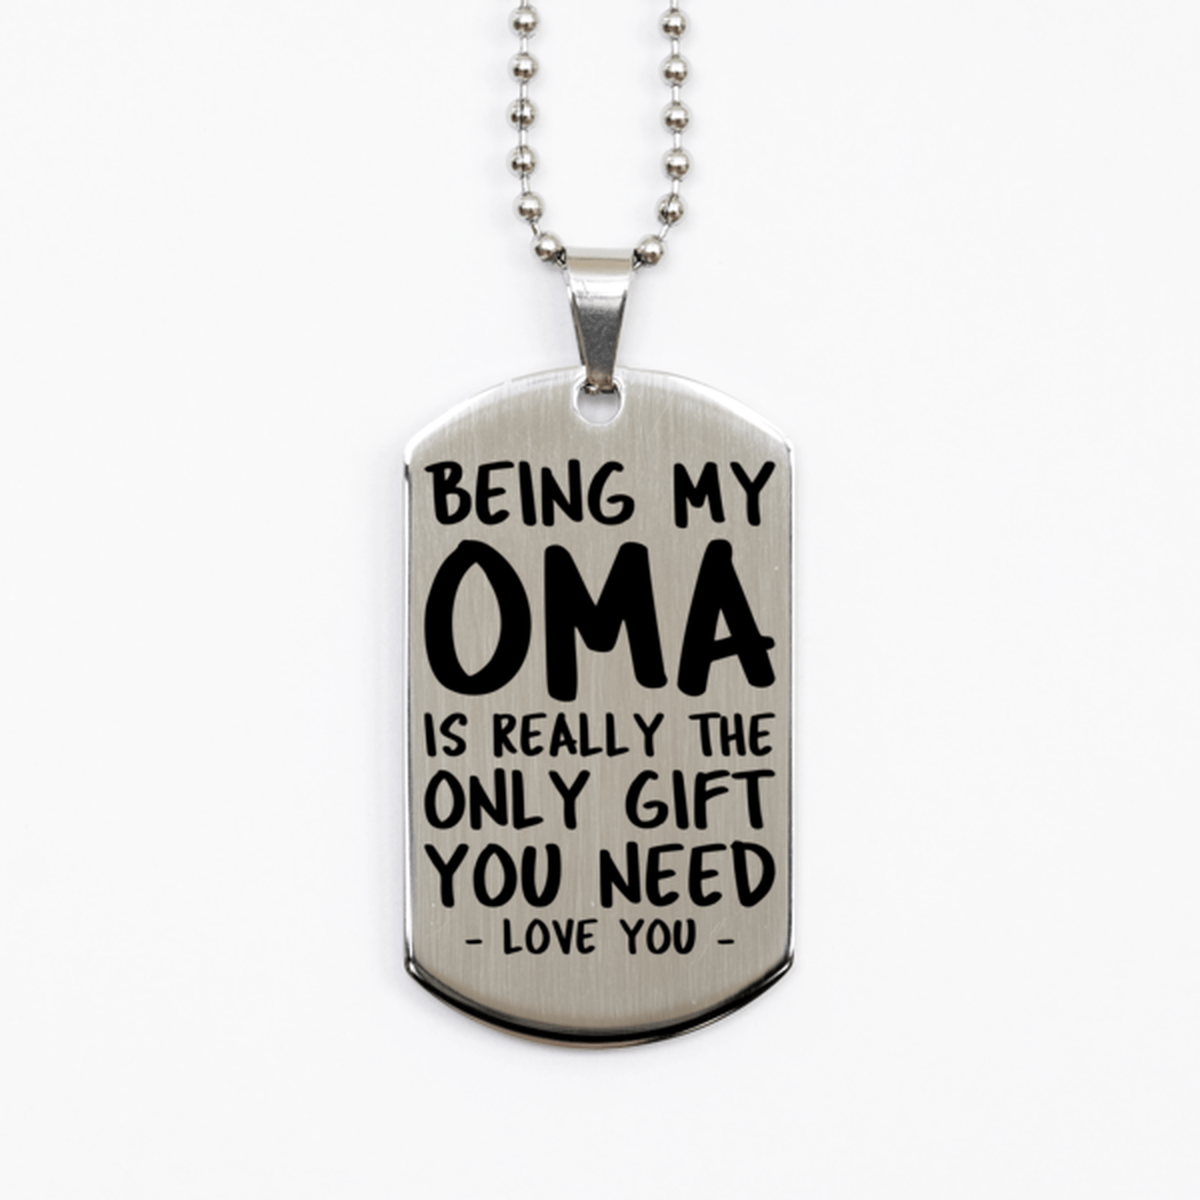 Funny Oma Silver Dog Tag Necklace, Being My Oma Is Really the Only Gift You Need, Best Birthday Gifts for Oma